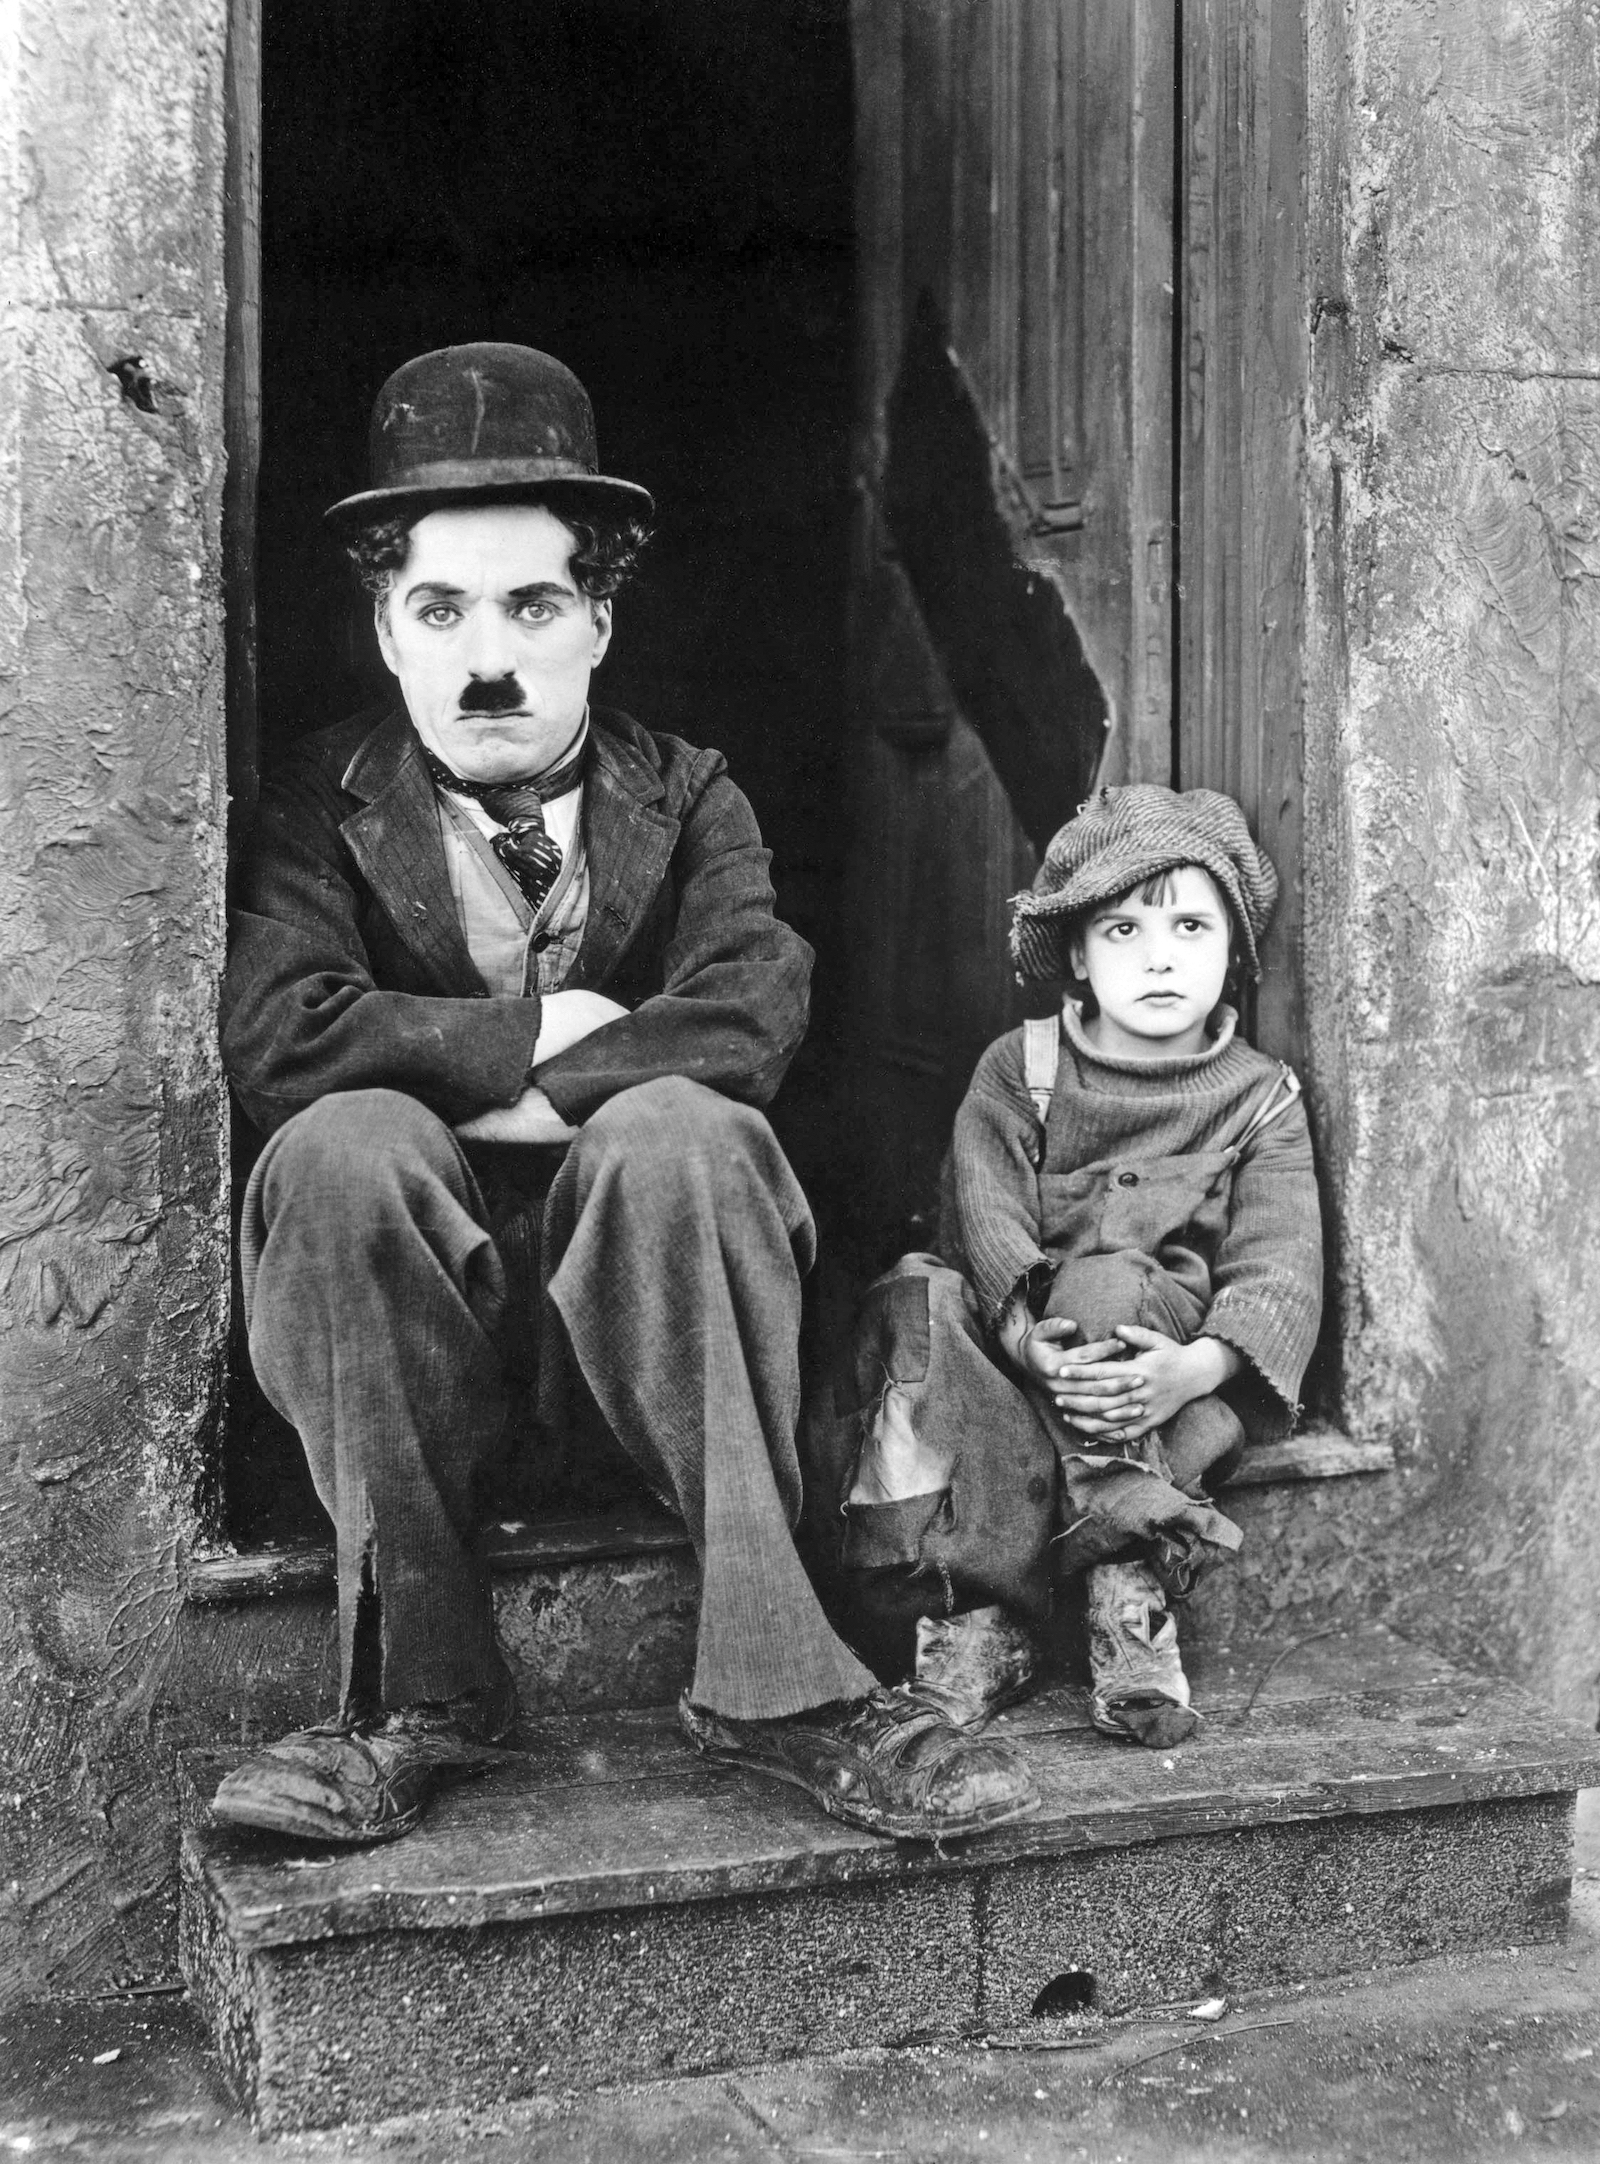 Jackie Coogan and Charlie Chaplin. Pubicity photograph for The Kid, 1921. J. Willis Sayre Collection of Theatrical Photographs, University of Washington. Public Domain.